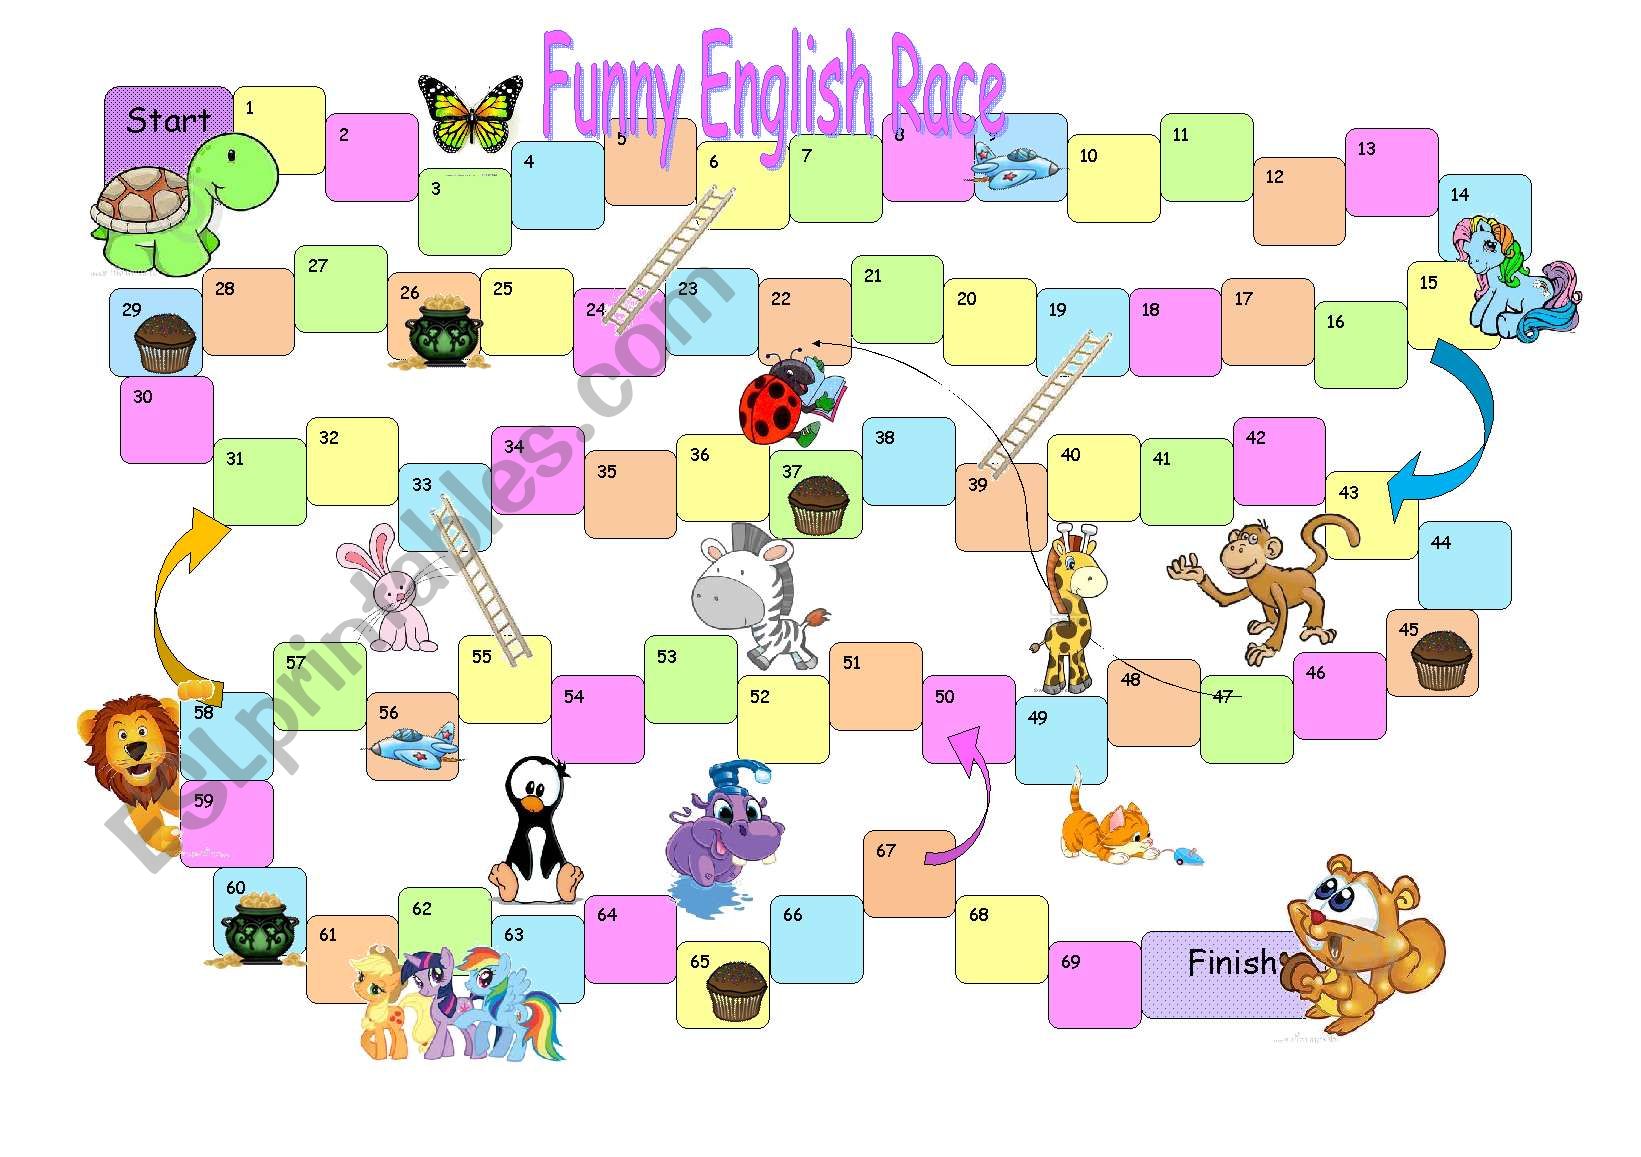 Board Game Funny English Race (pink cards)